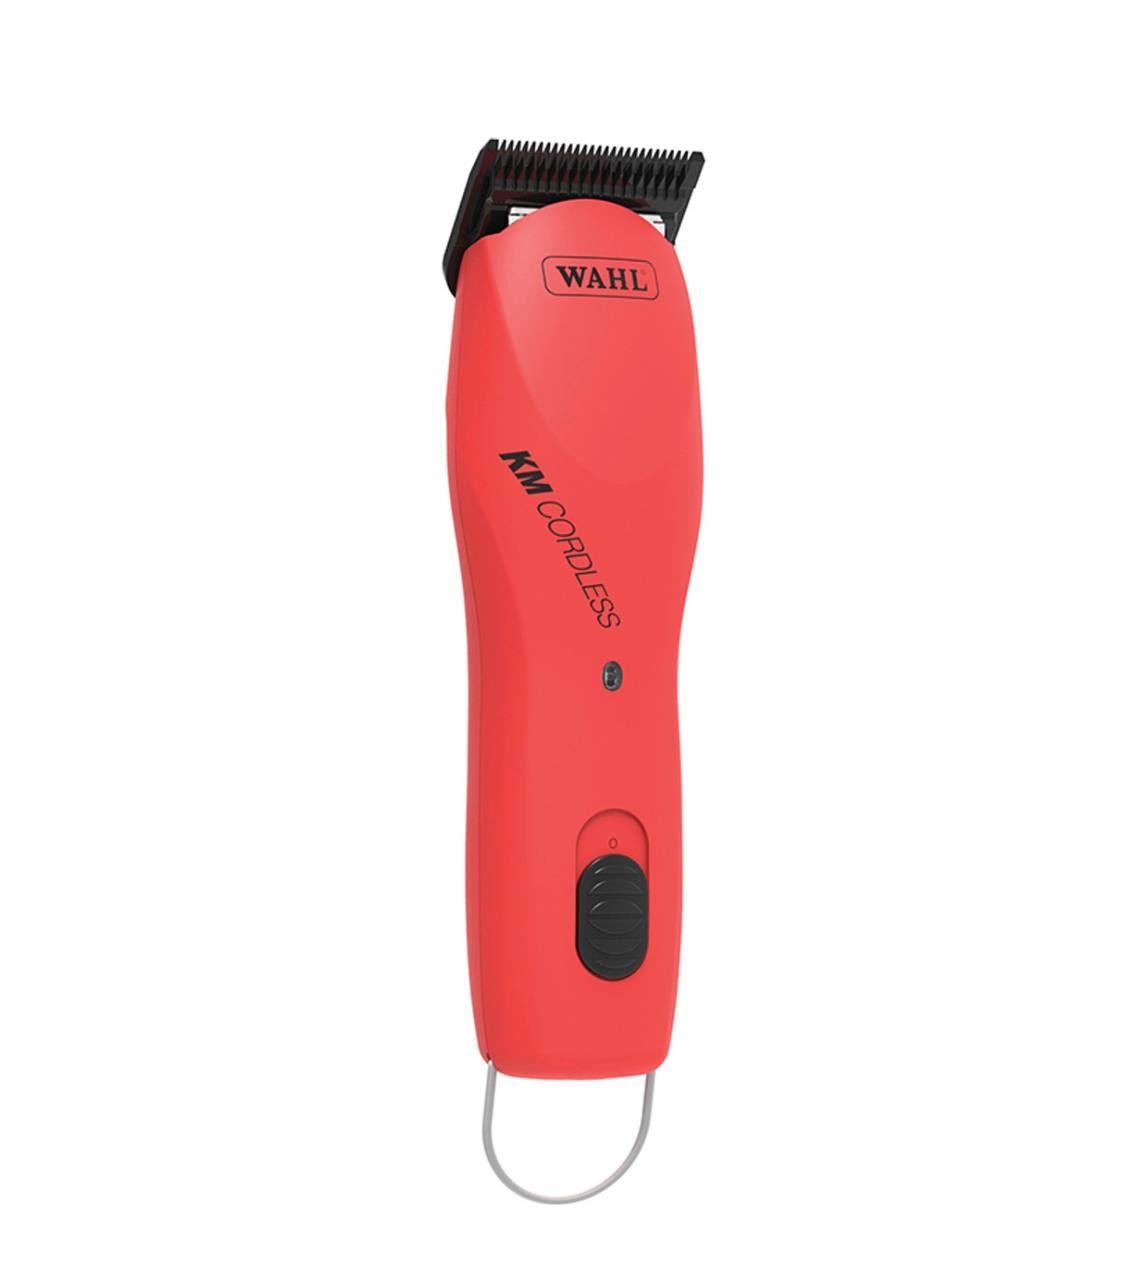 Wahl KM Cordless Clipper, Poppy
Red